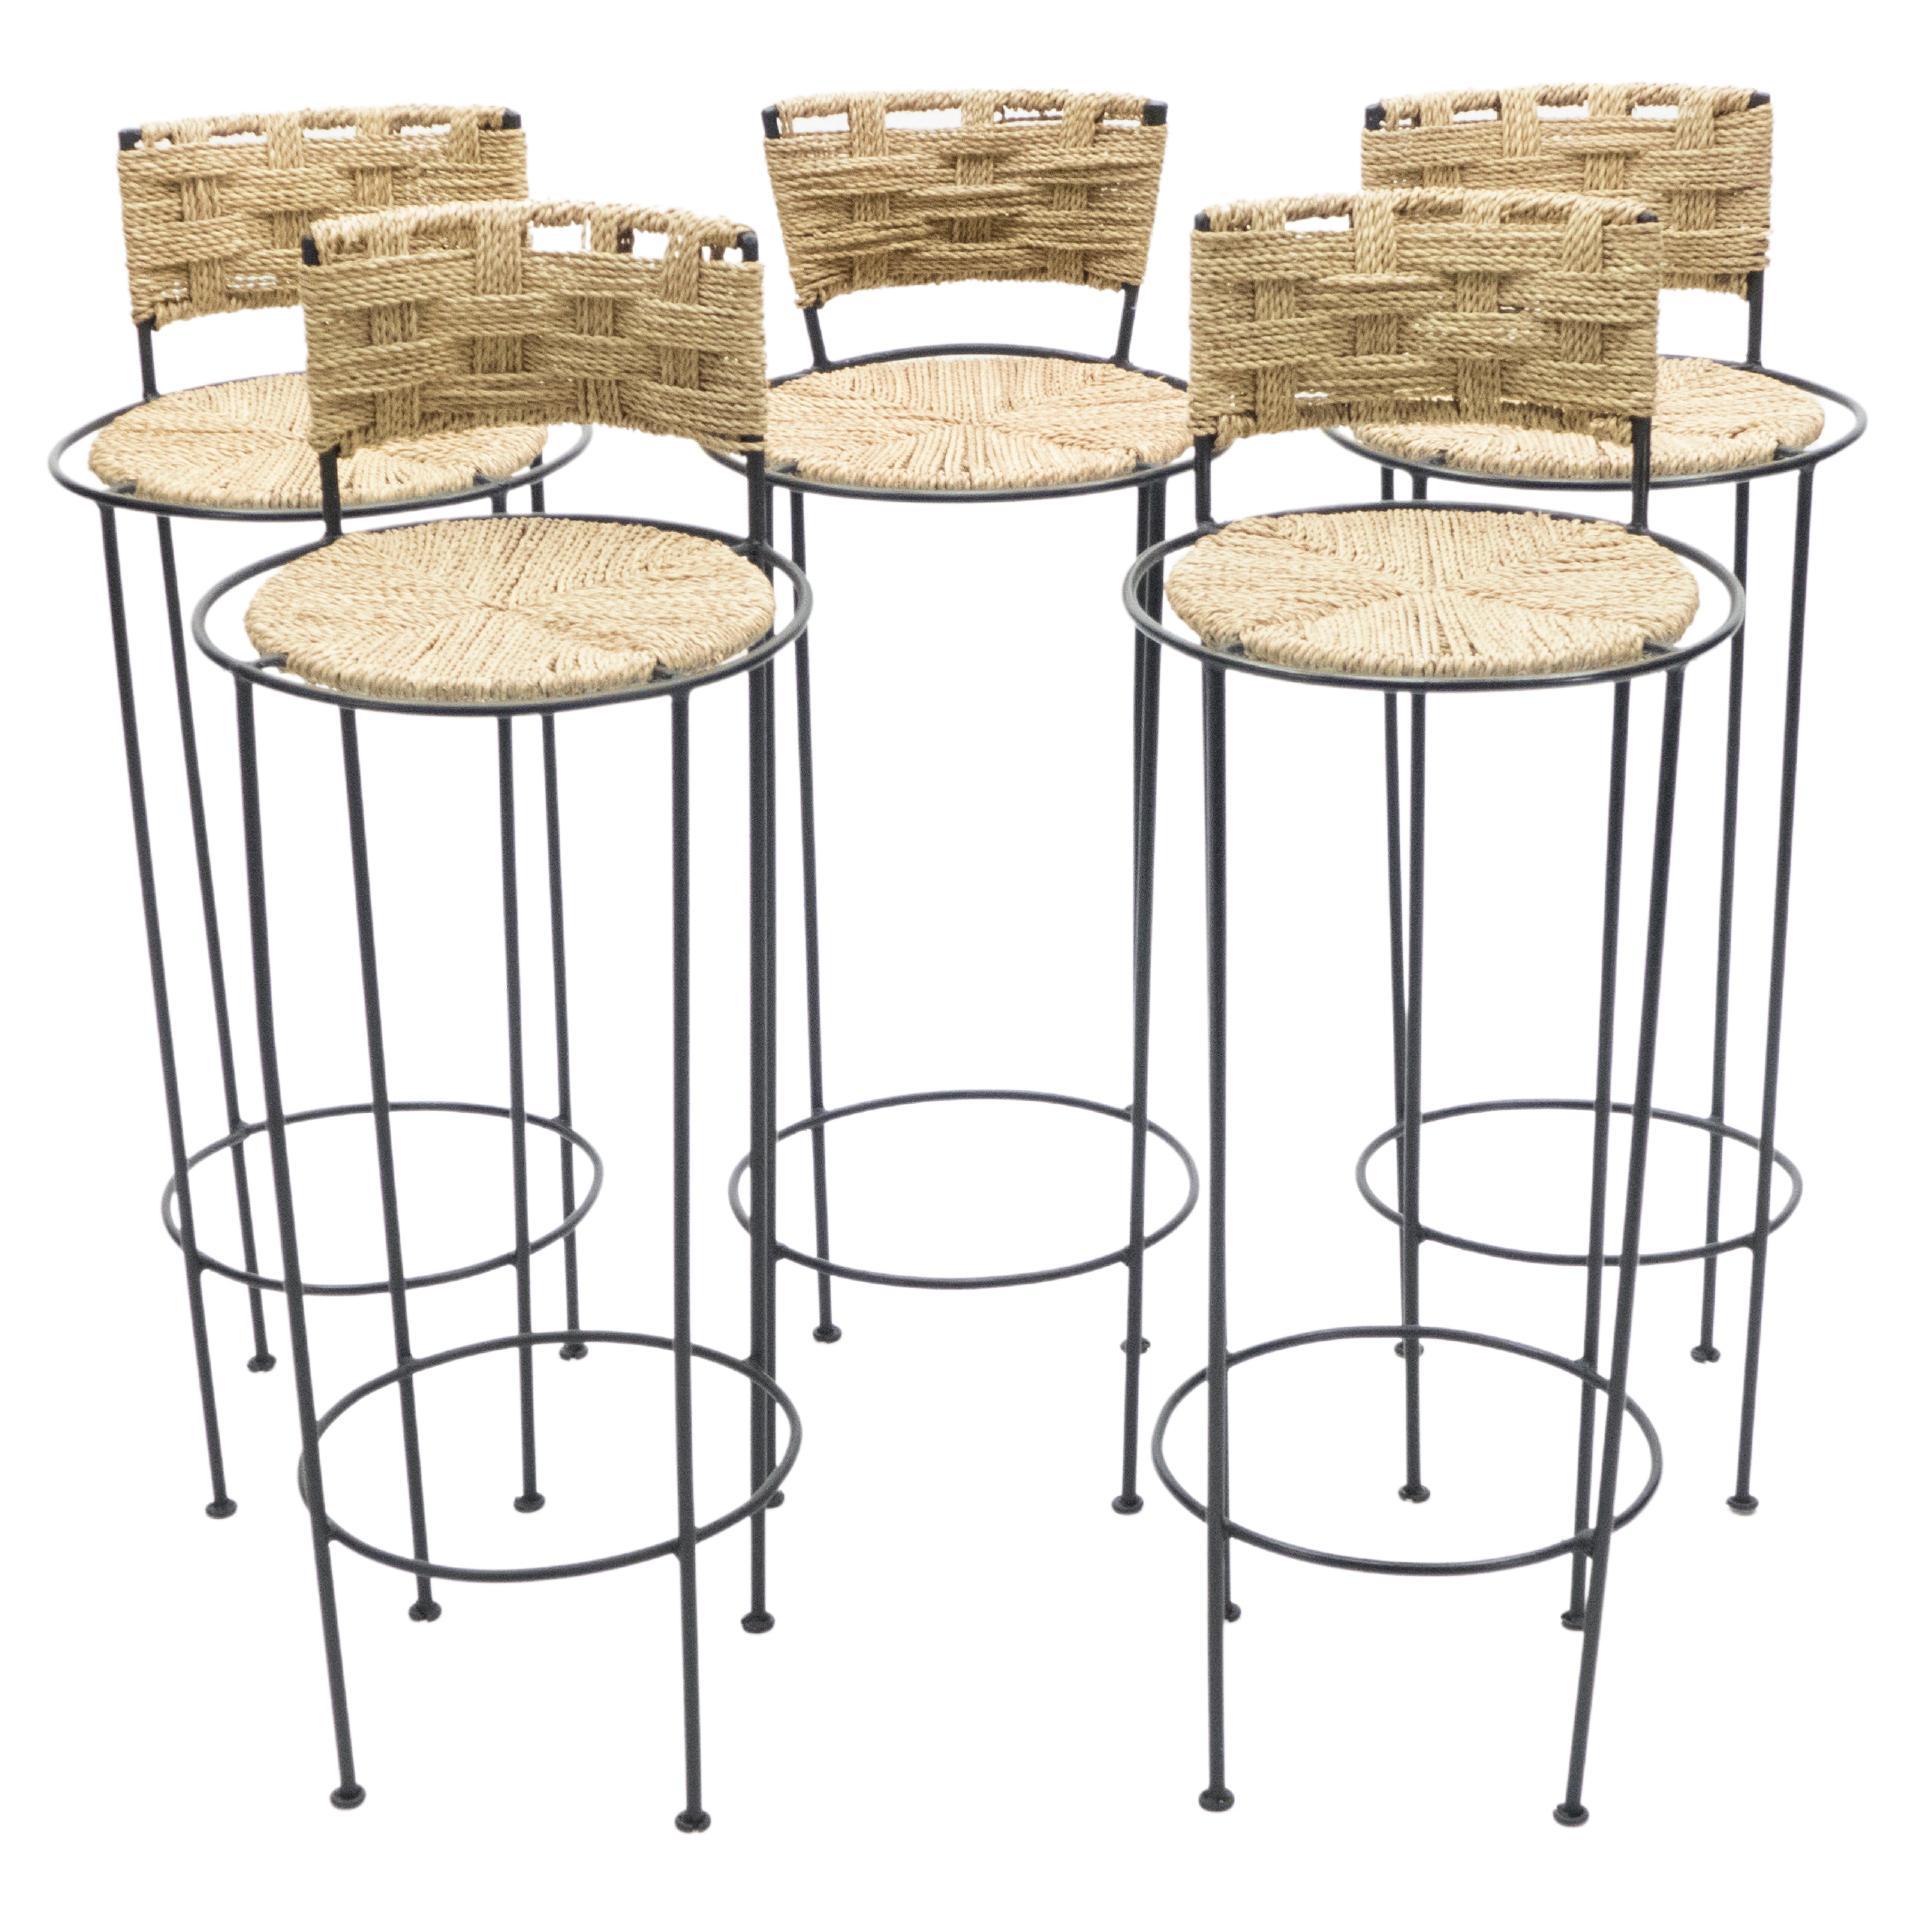 Set of 5 French Bar Stools Rope and Metal by Audoux Minet, 1950s